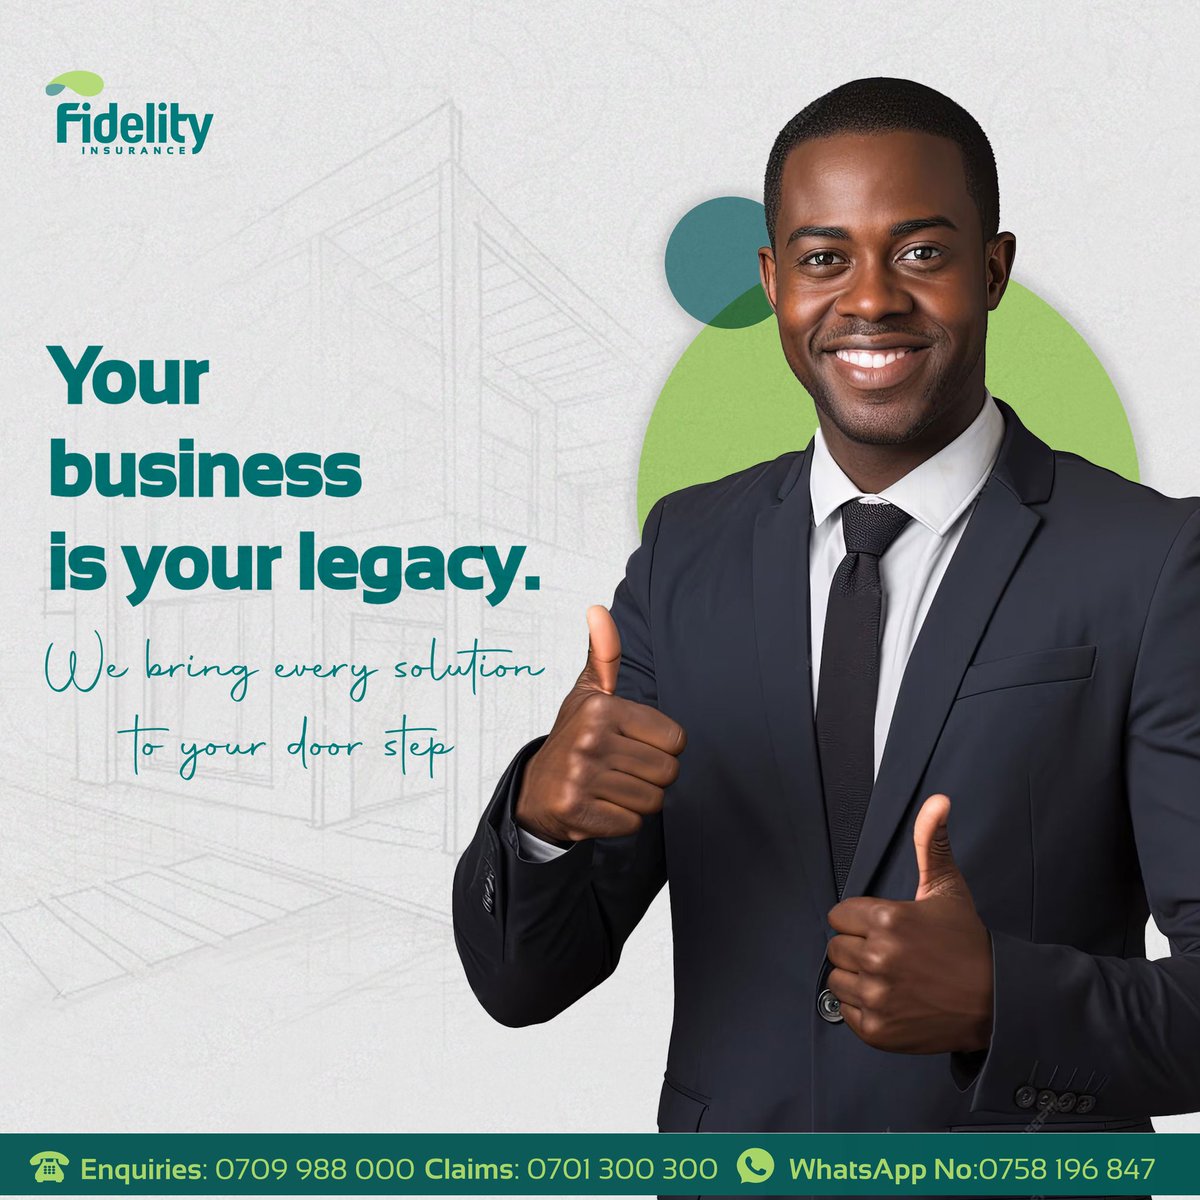 Ensure your business is safeguarded against all risks with our comprehensive business insurance solutions. Contact us on 0709988000 for a quote! 
#fidelityinsurance #insuranceyoucantrust #businessinsurance #insurance